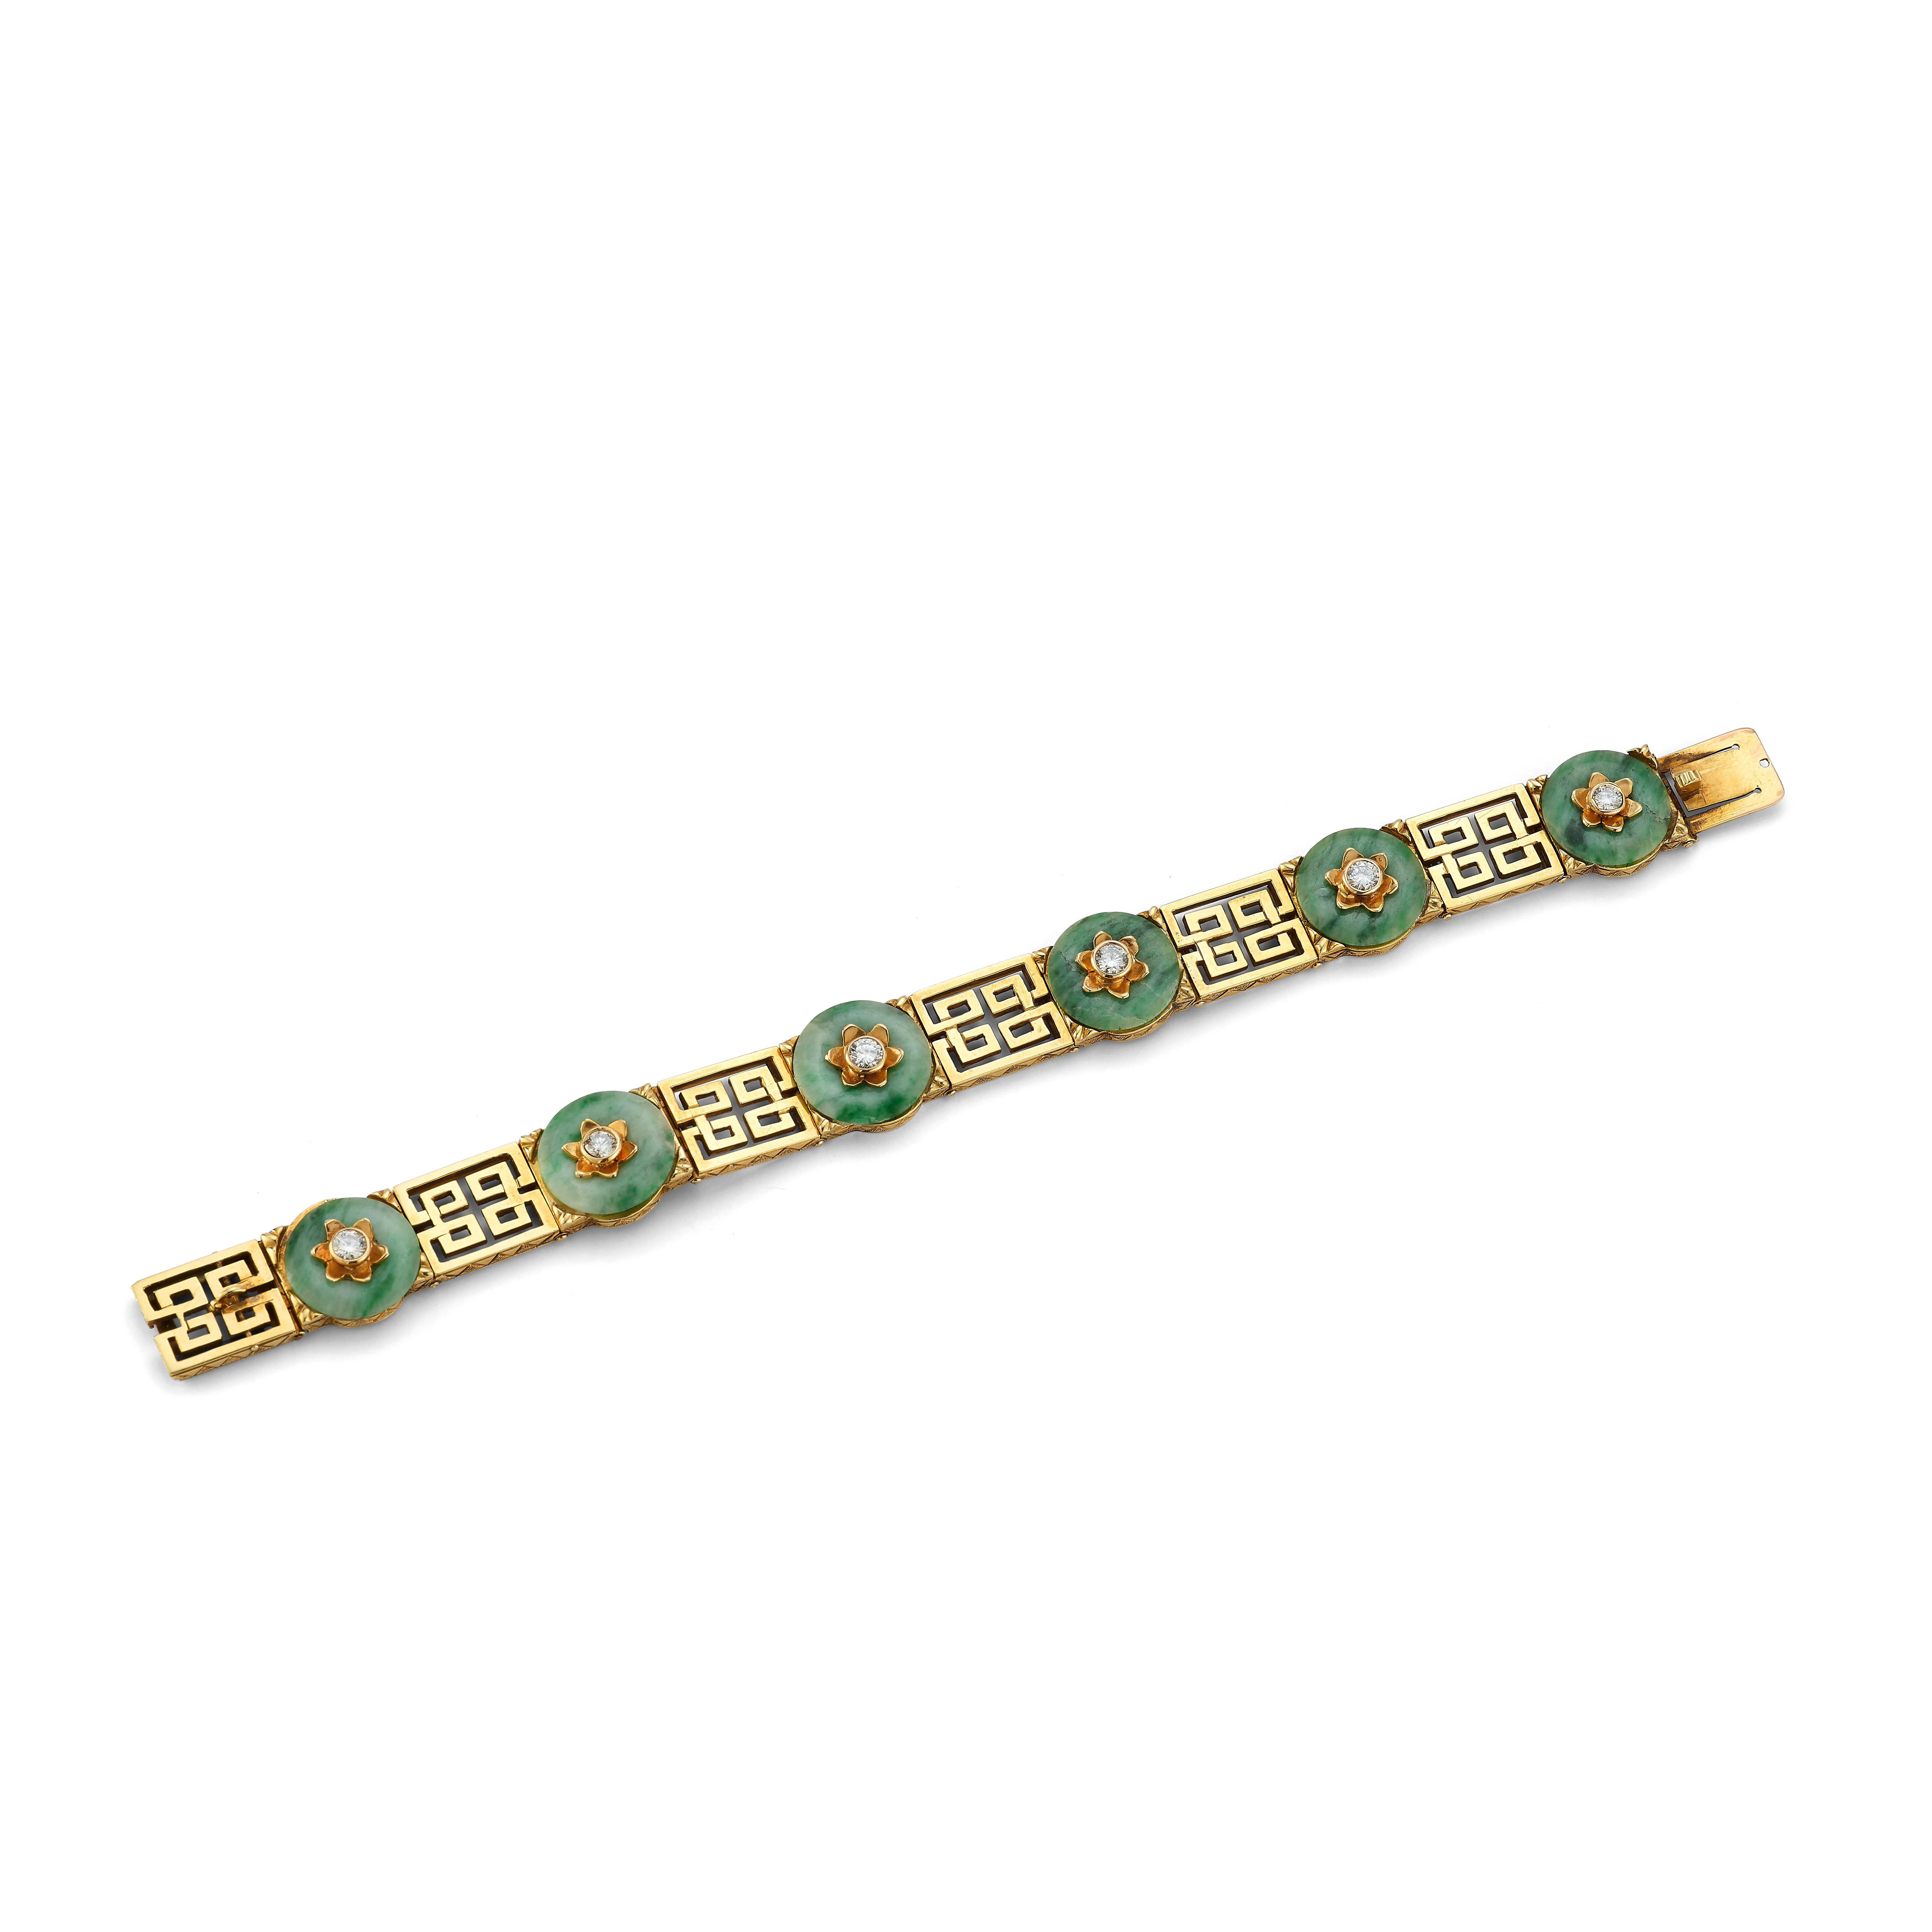 Tiffany & Co Jade & diamond Gold Bracelet.

A bracelet consisting of 6 jade discs with 6 diamond & gold flower motifs on top of each jade. Each jade is attached to a geometric design gold link. 

Measurements: 7